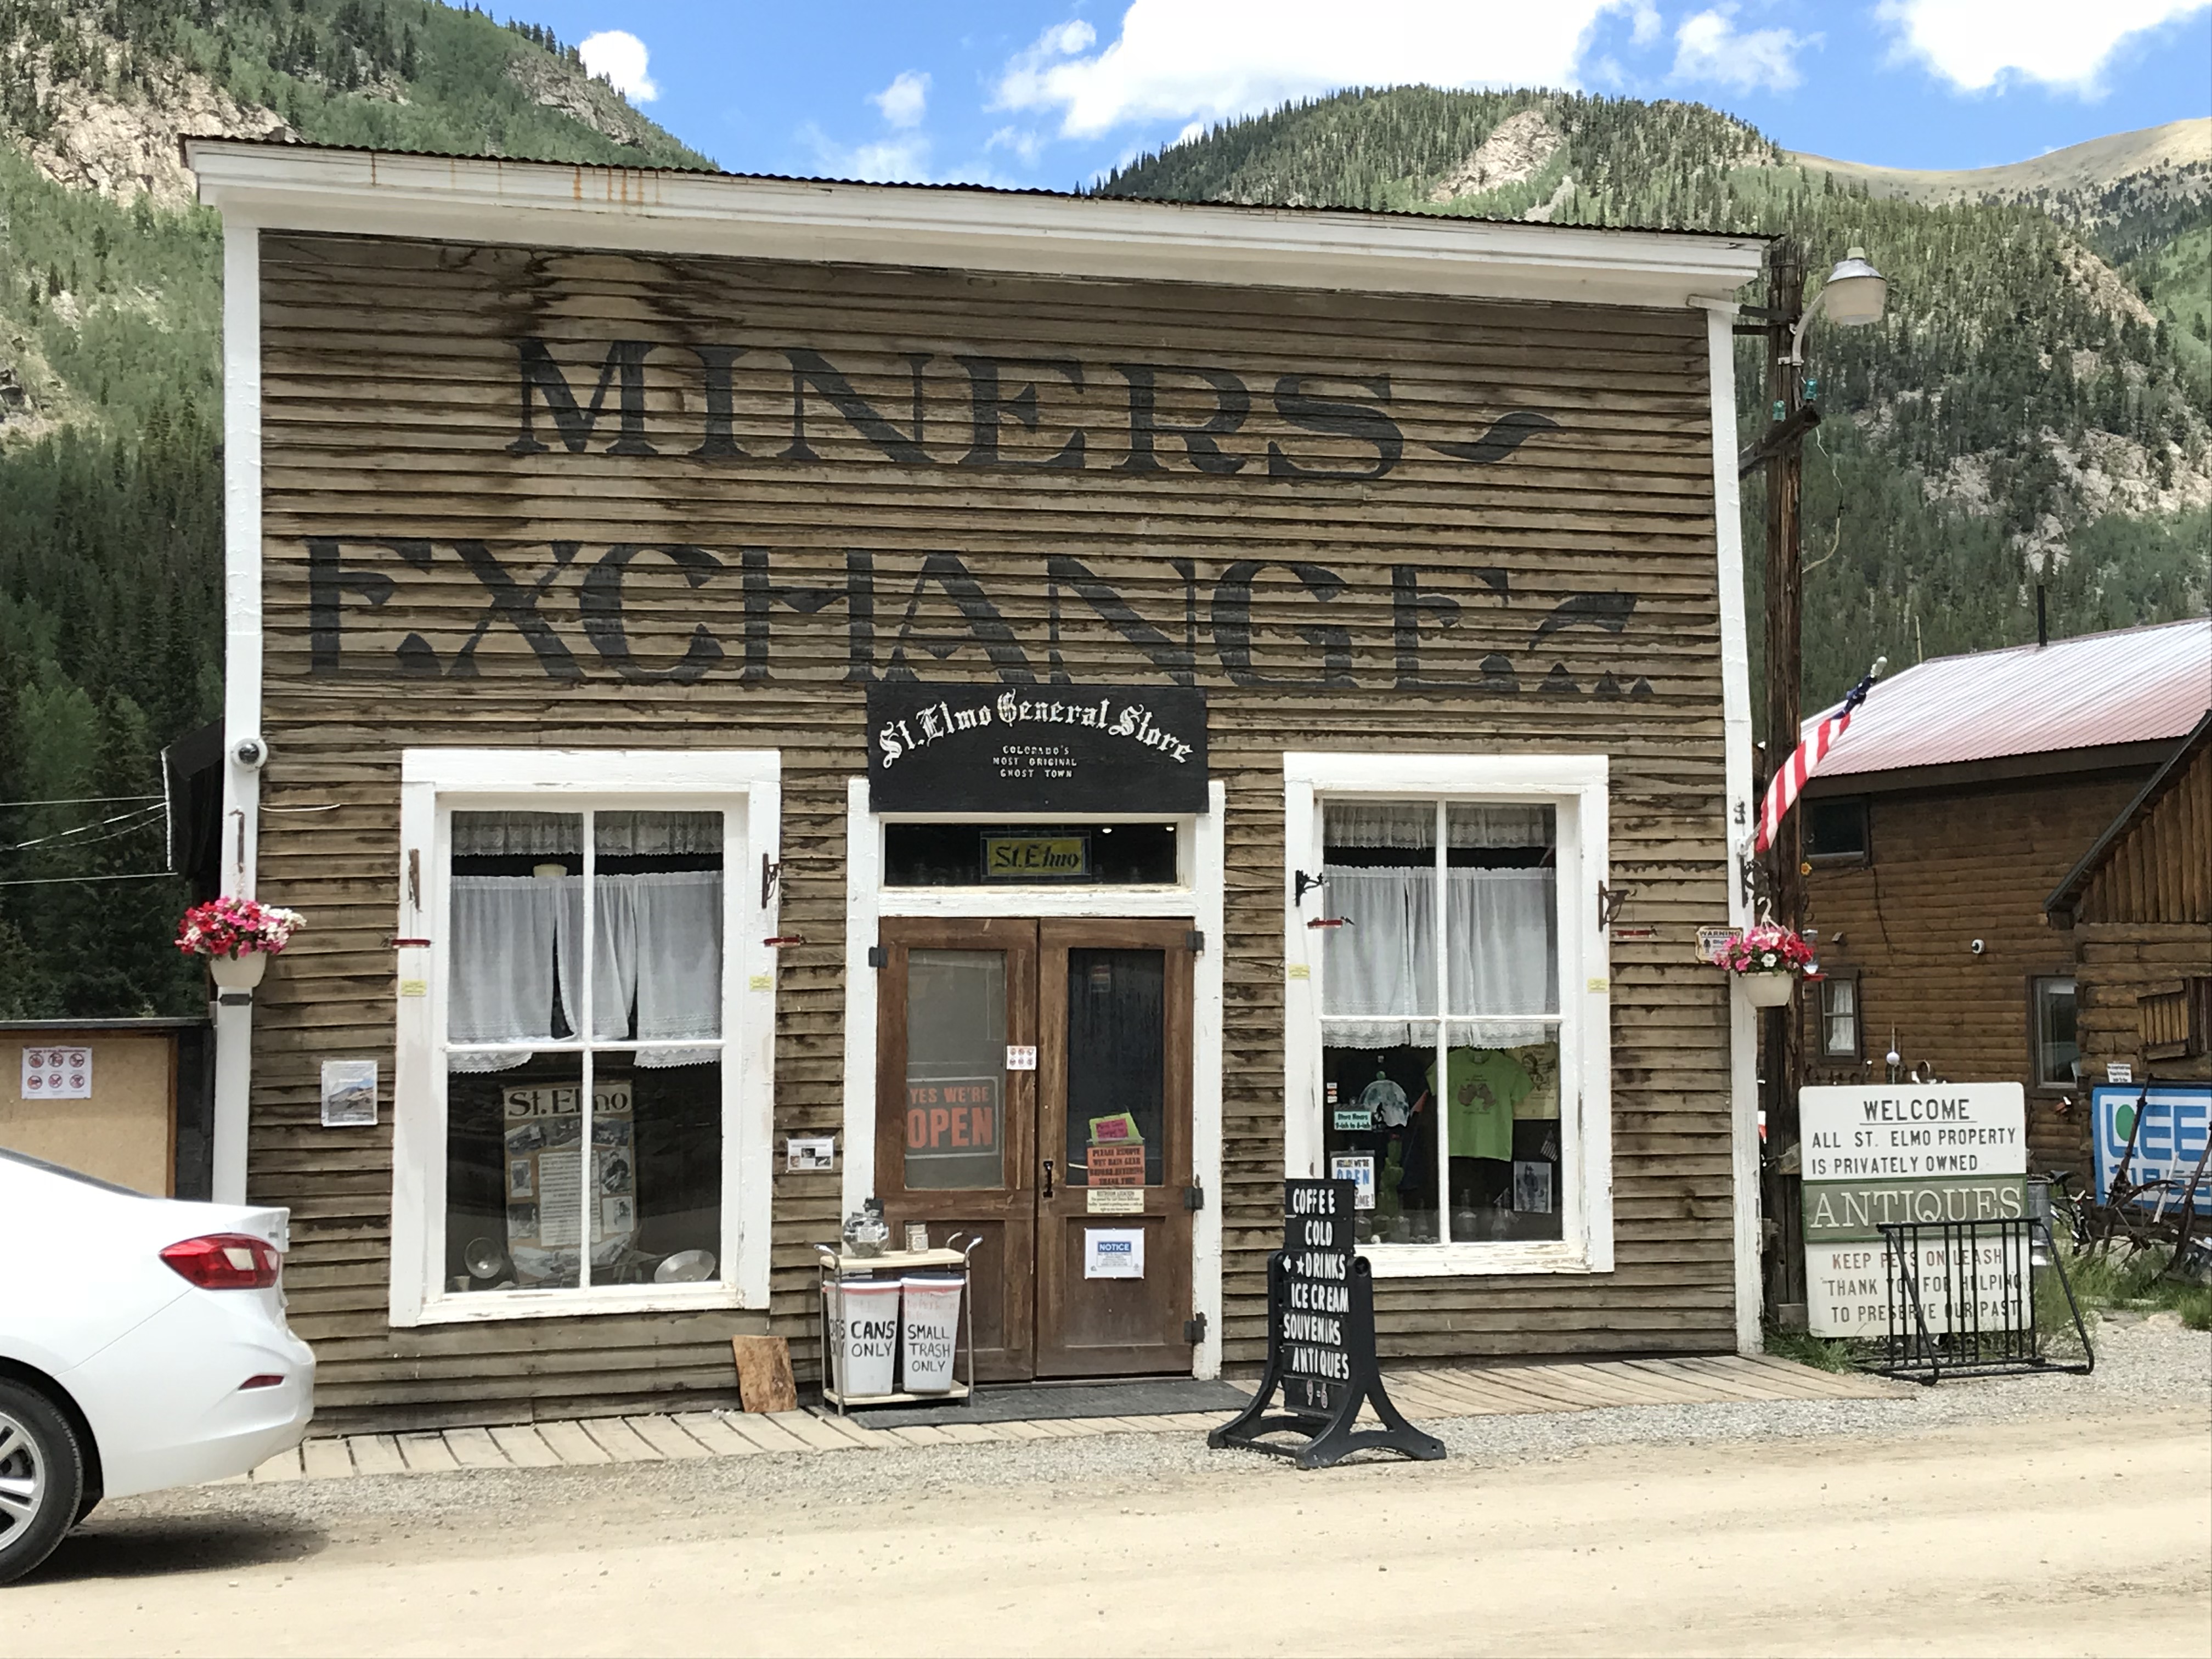 An old, one-story shop that reads, "Miners Exchange, St. Elmo General Store"